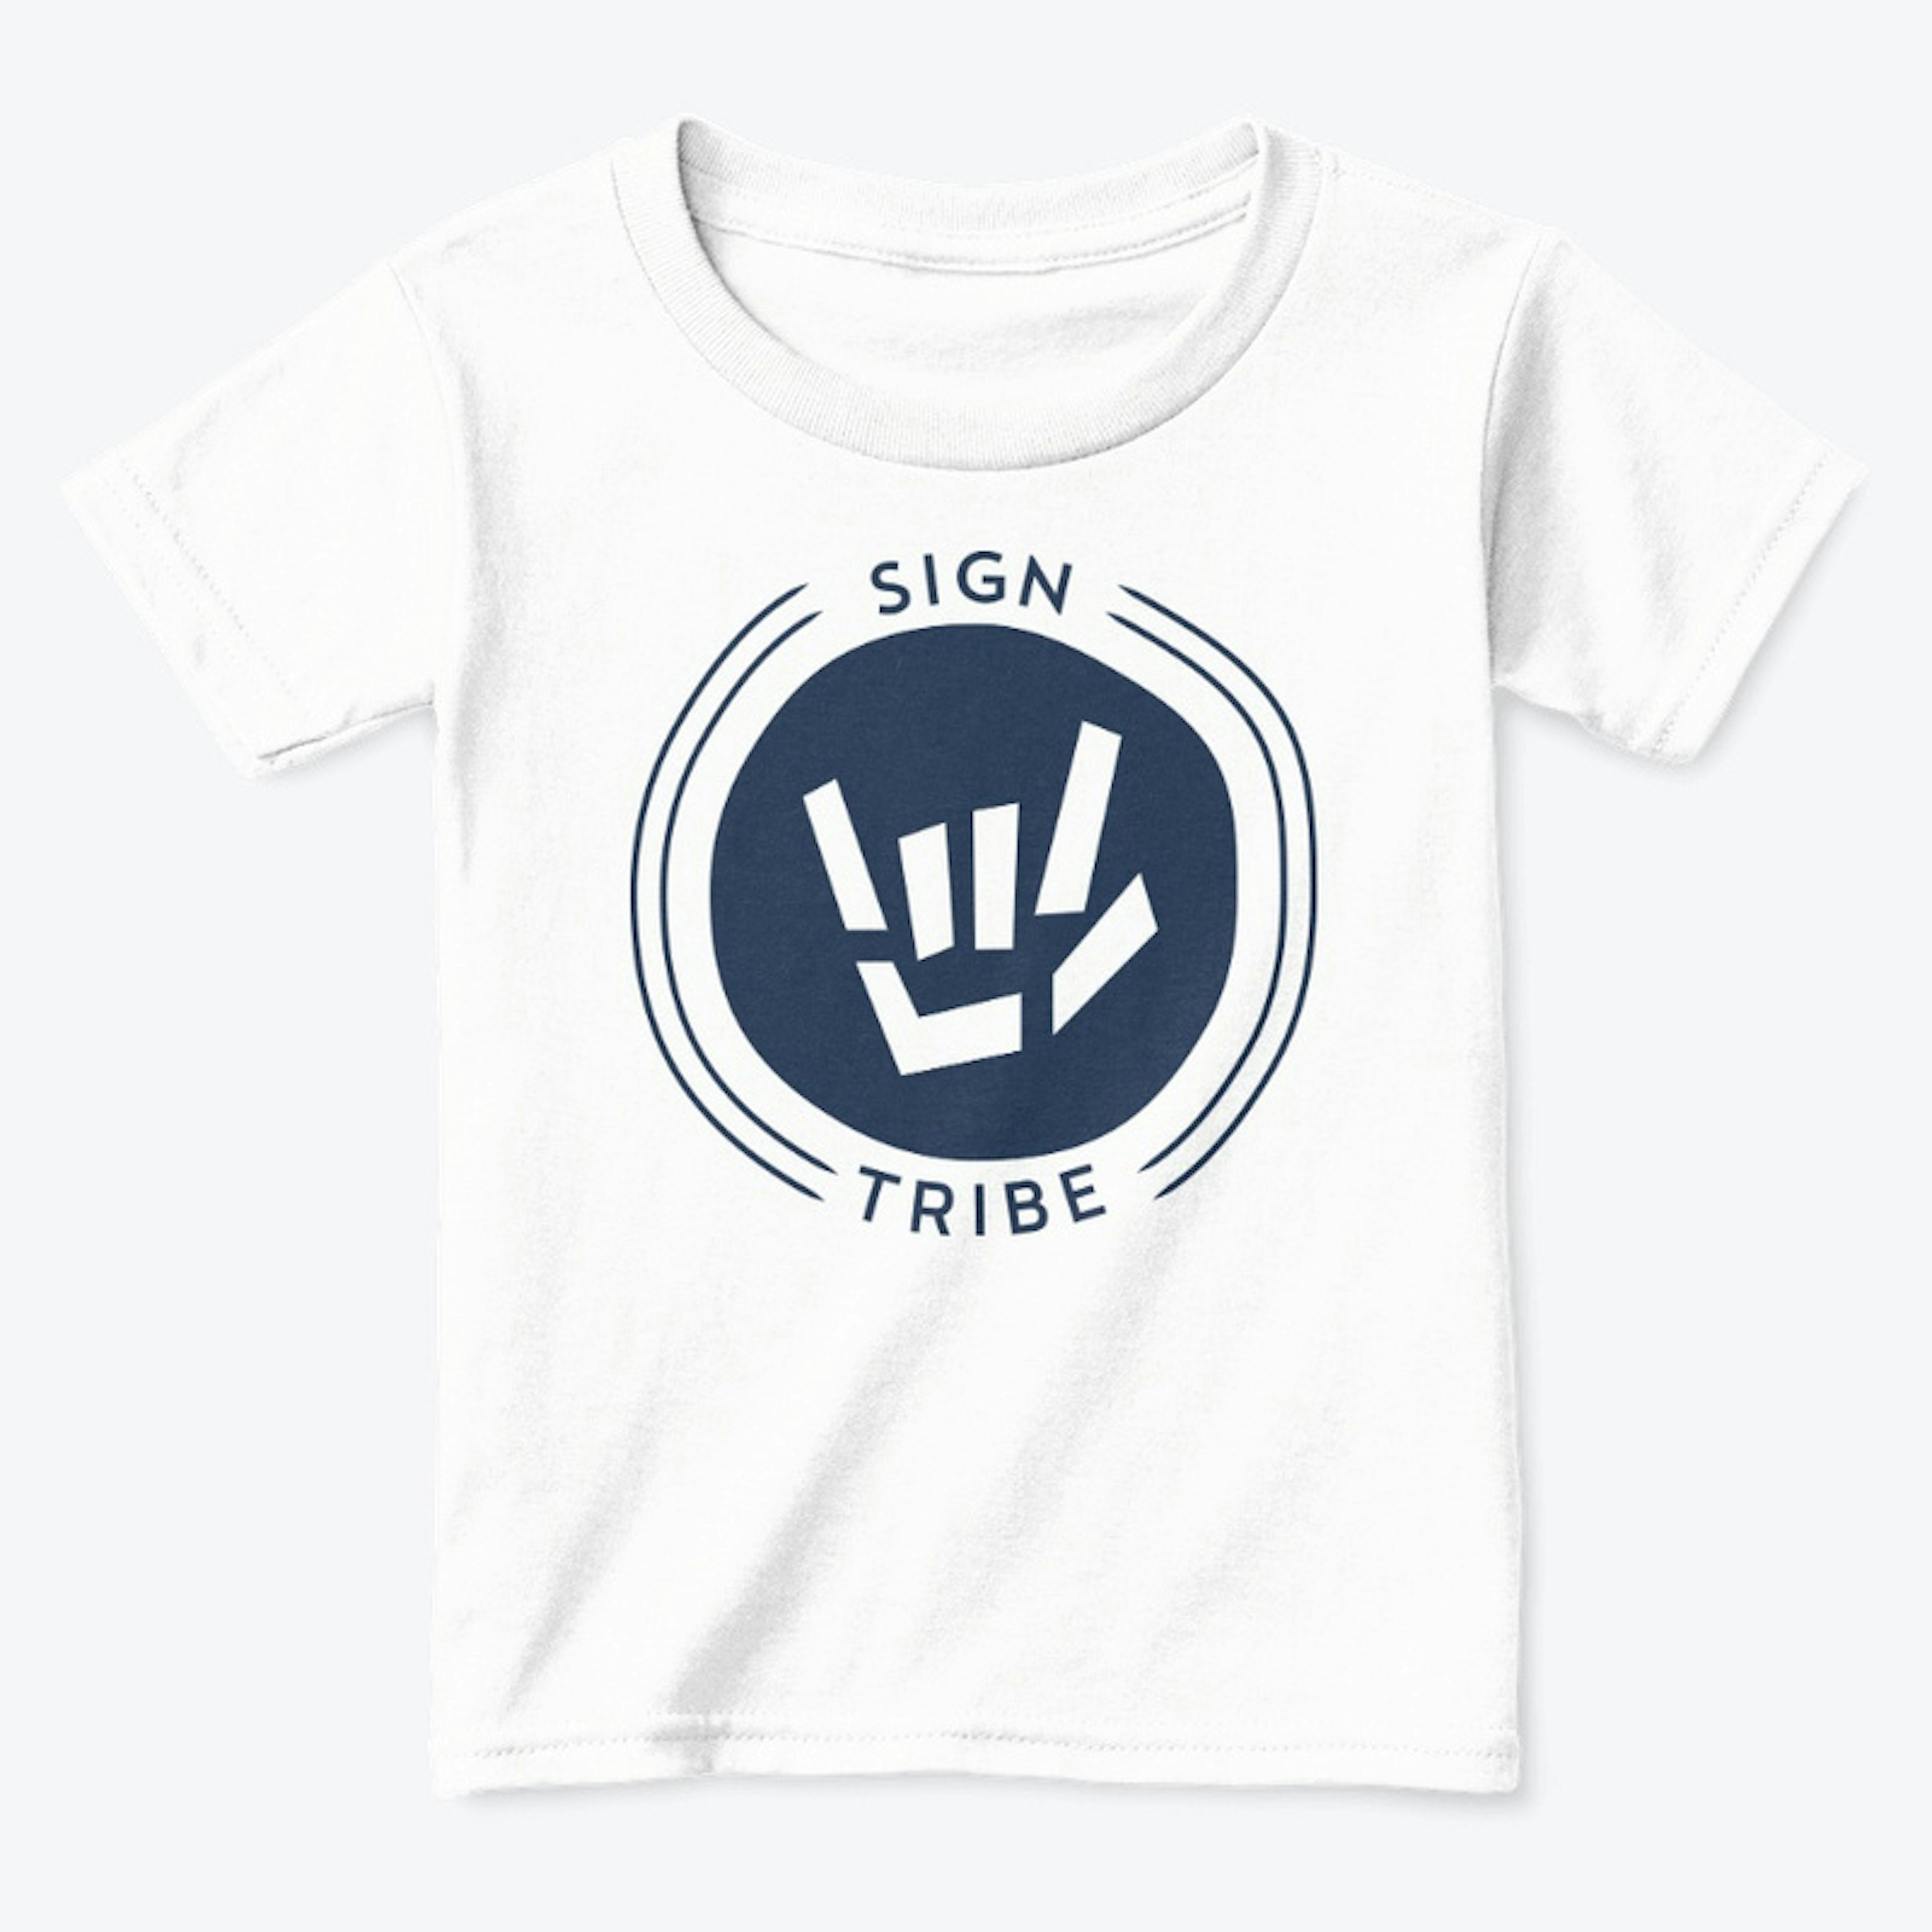 Sign Tribe Toddler Tee